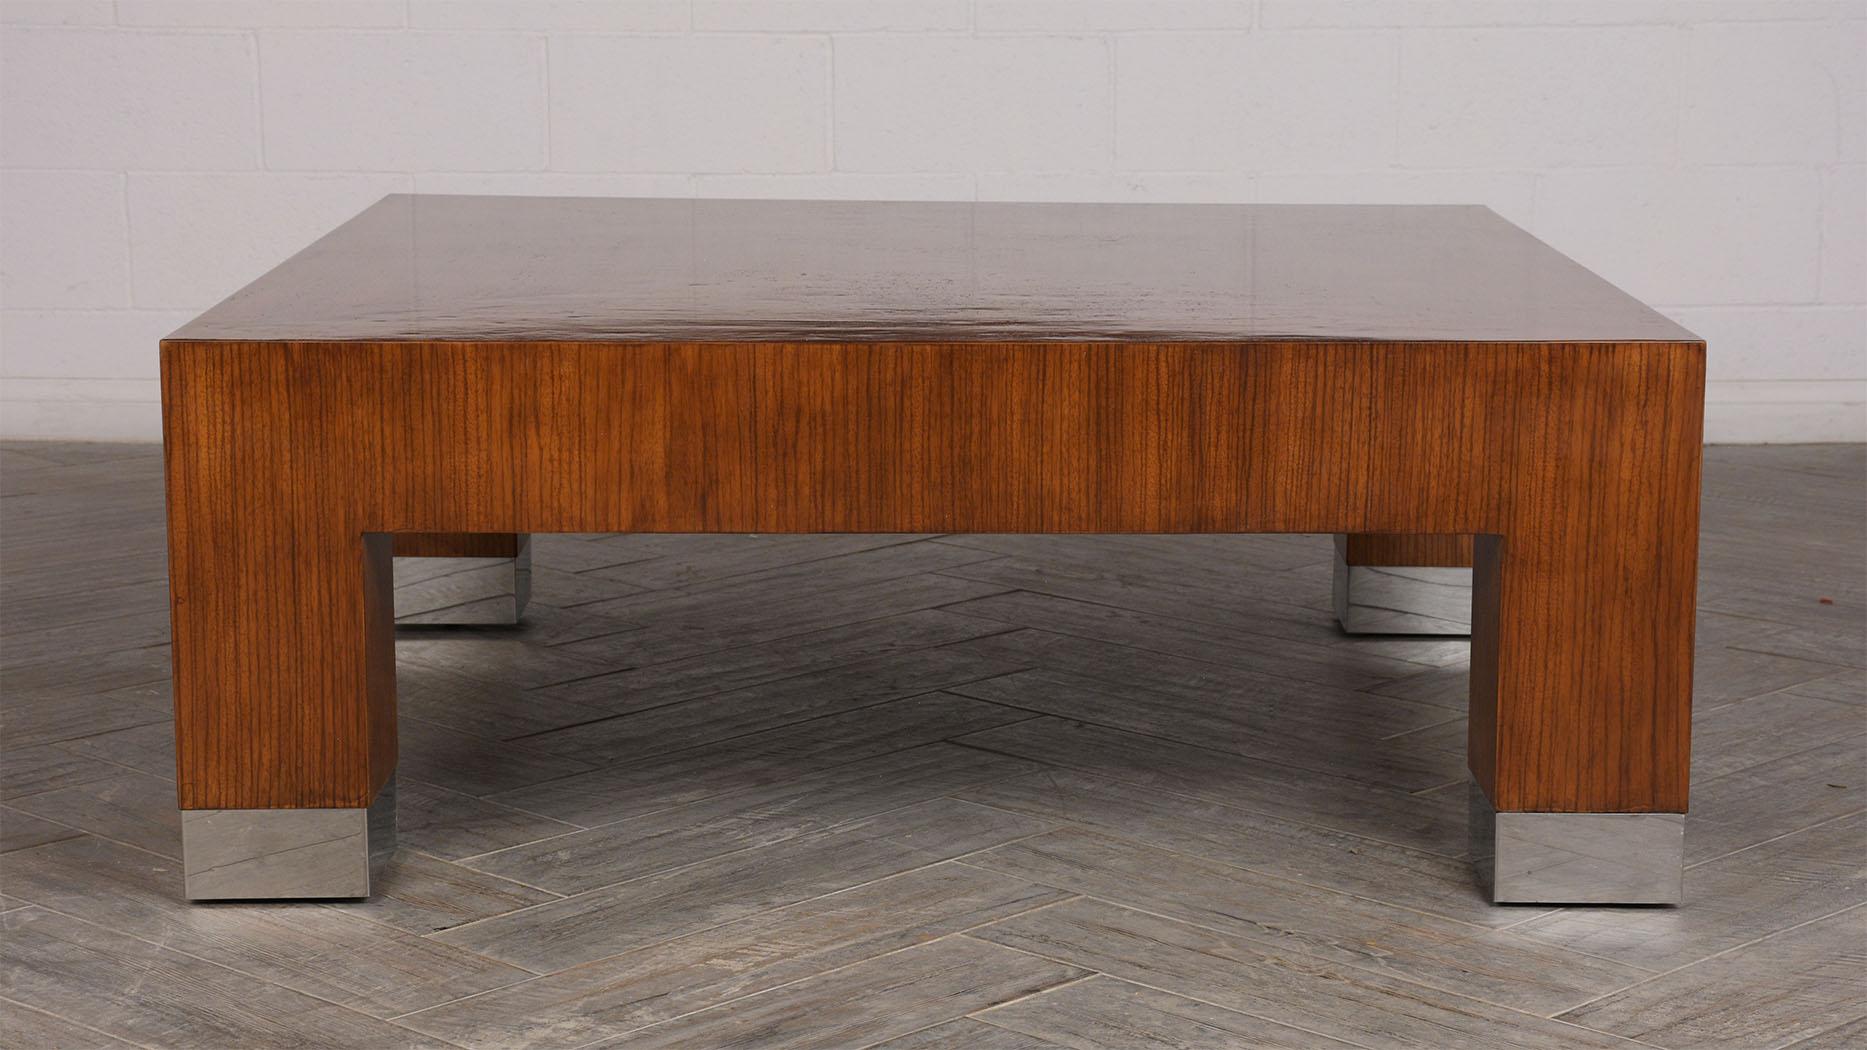 Late 20th Century Mid-Century Modern Lacquered Square Coffee Table